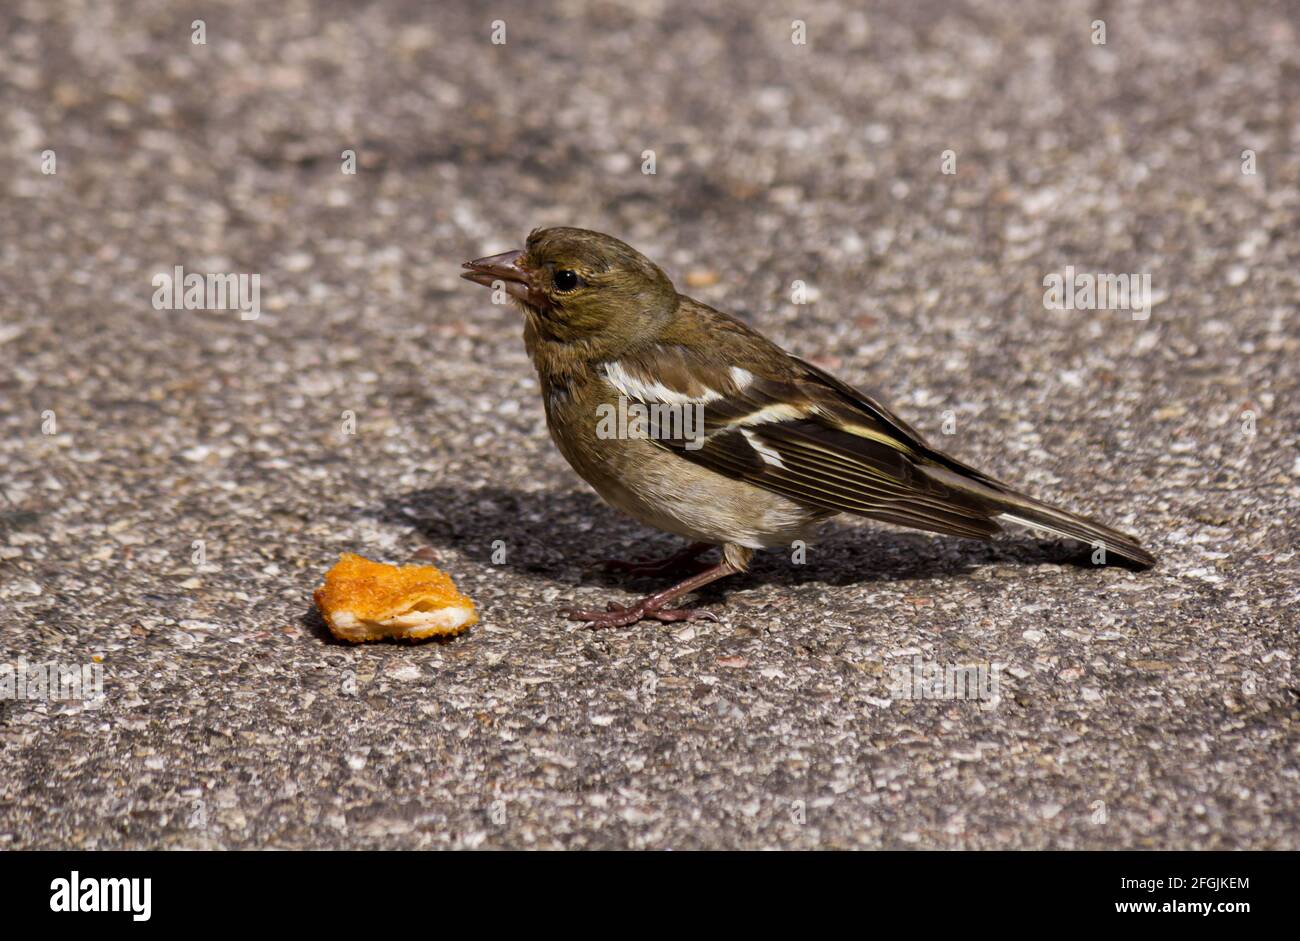 House sparrow (Passer domesticus) sitting on asphalt with piece of leftover food Stock Photo